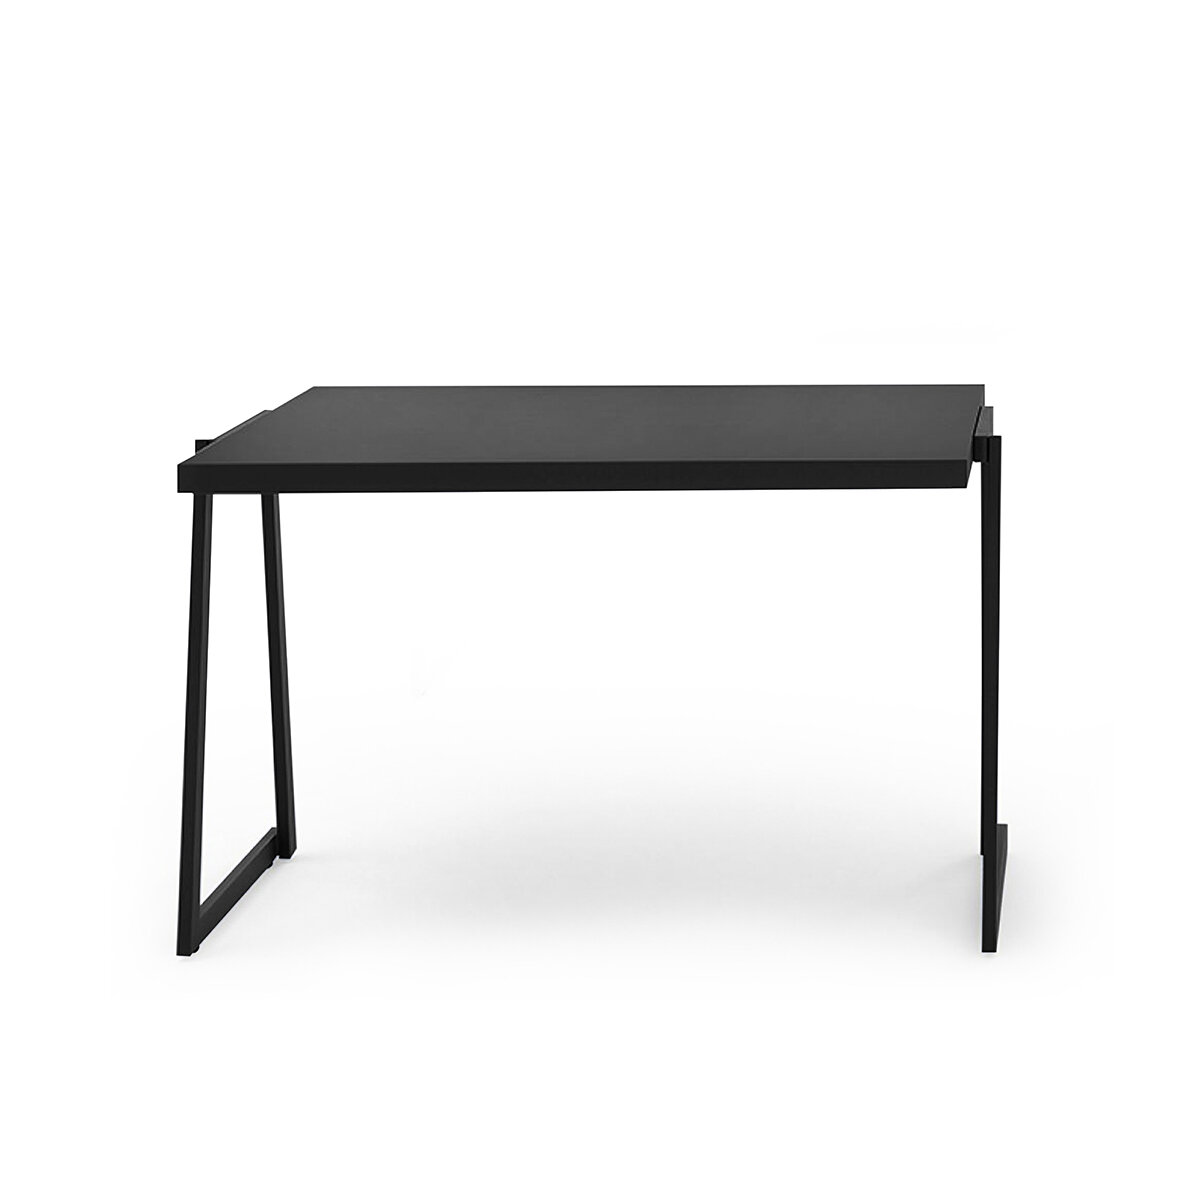 library-images-ctable-9c1-120x72.5-rectangular-table-black-finish.jpg